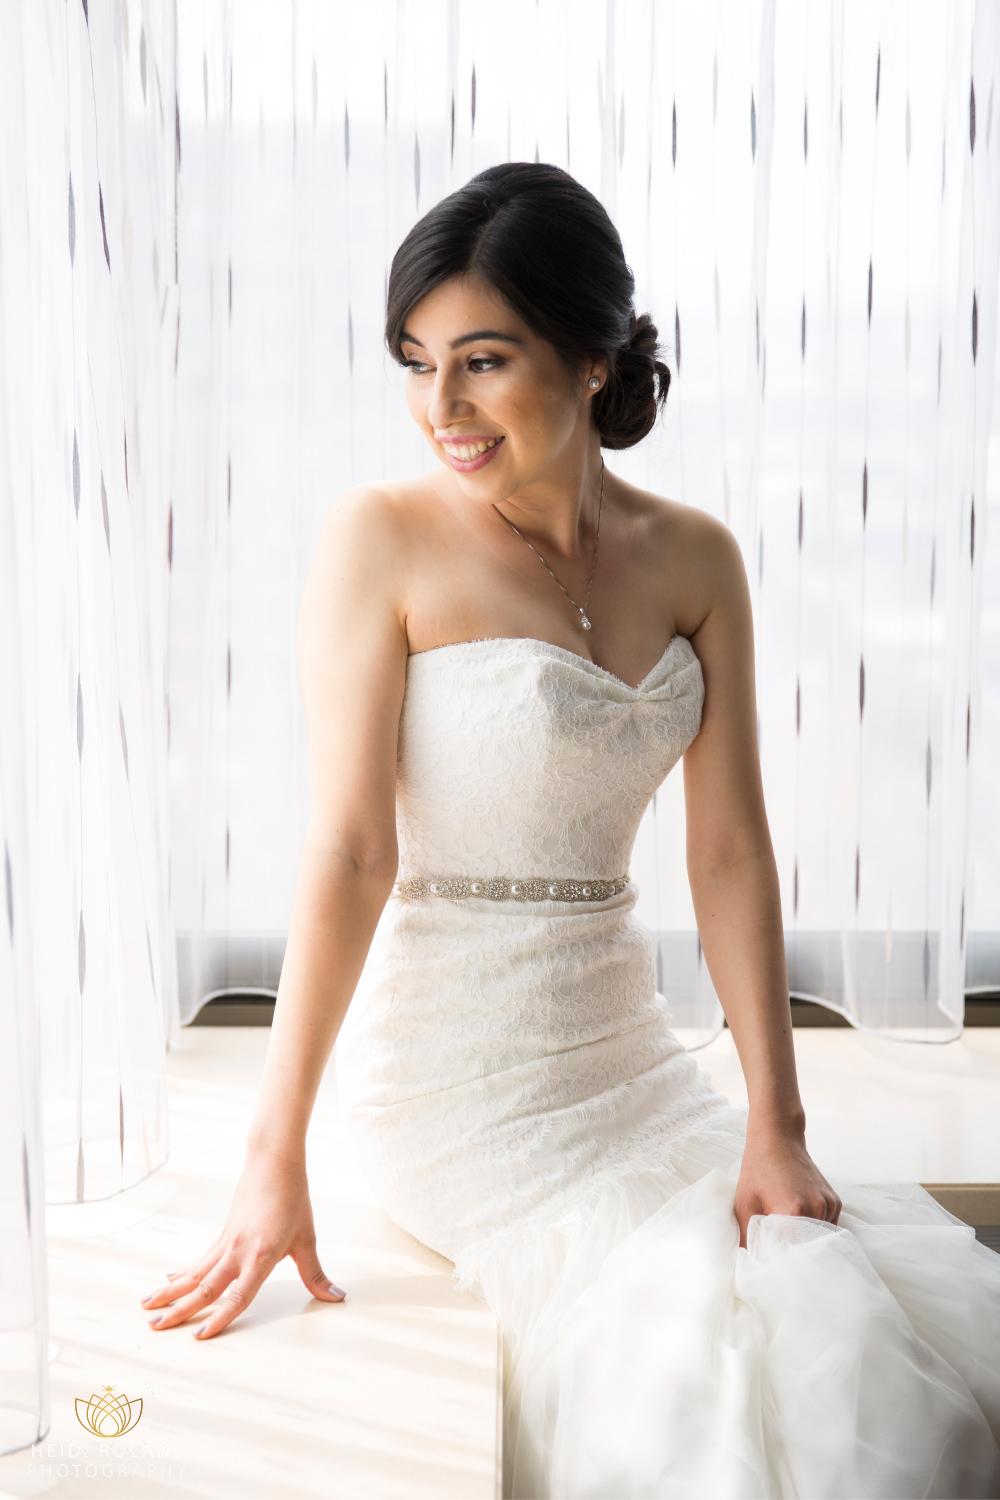 Bridal photos in Philly hotel